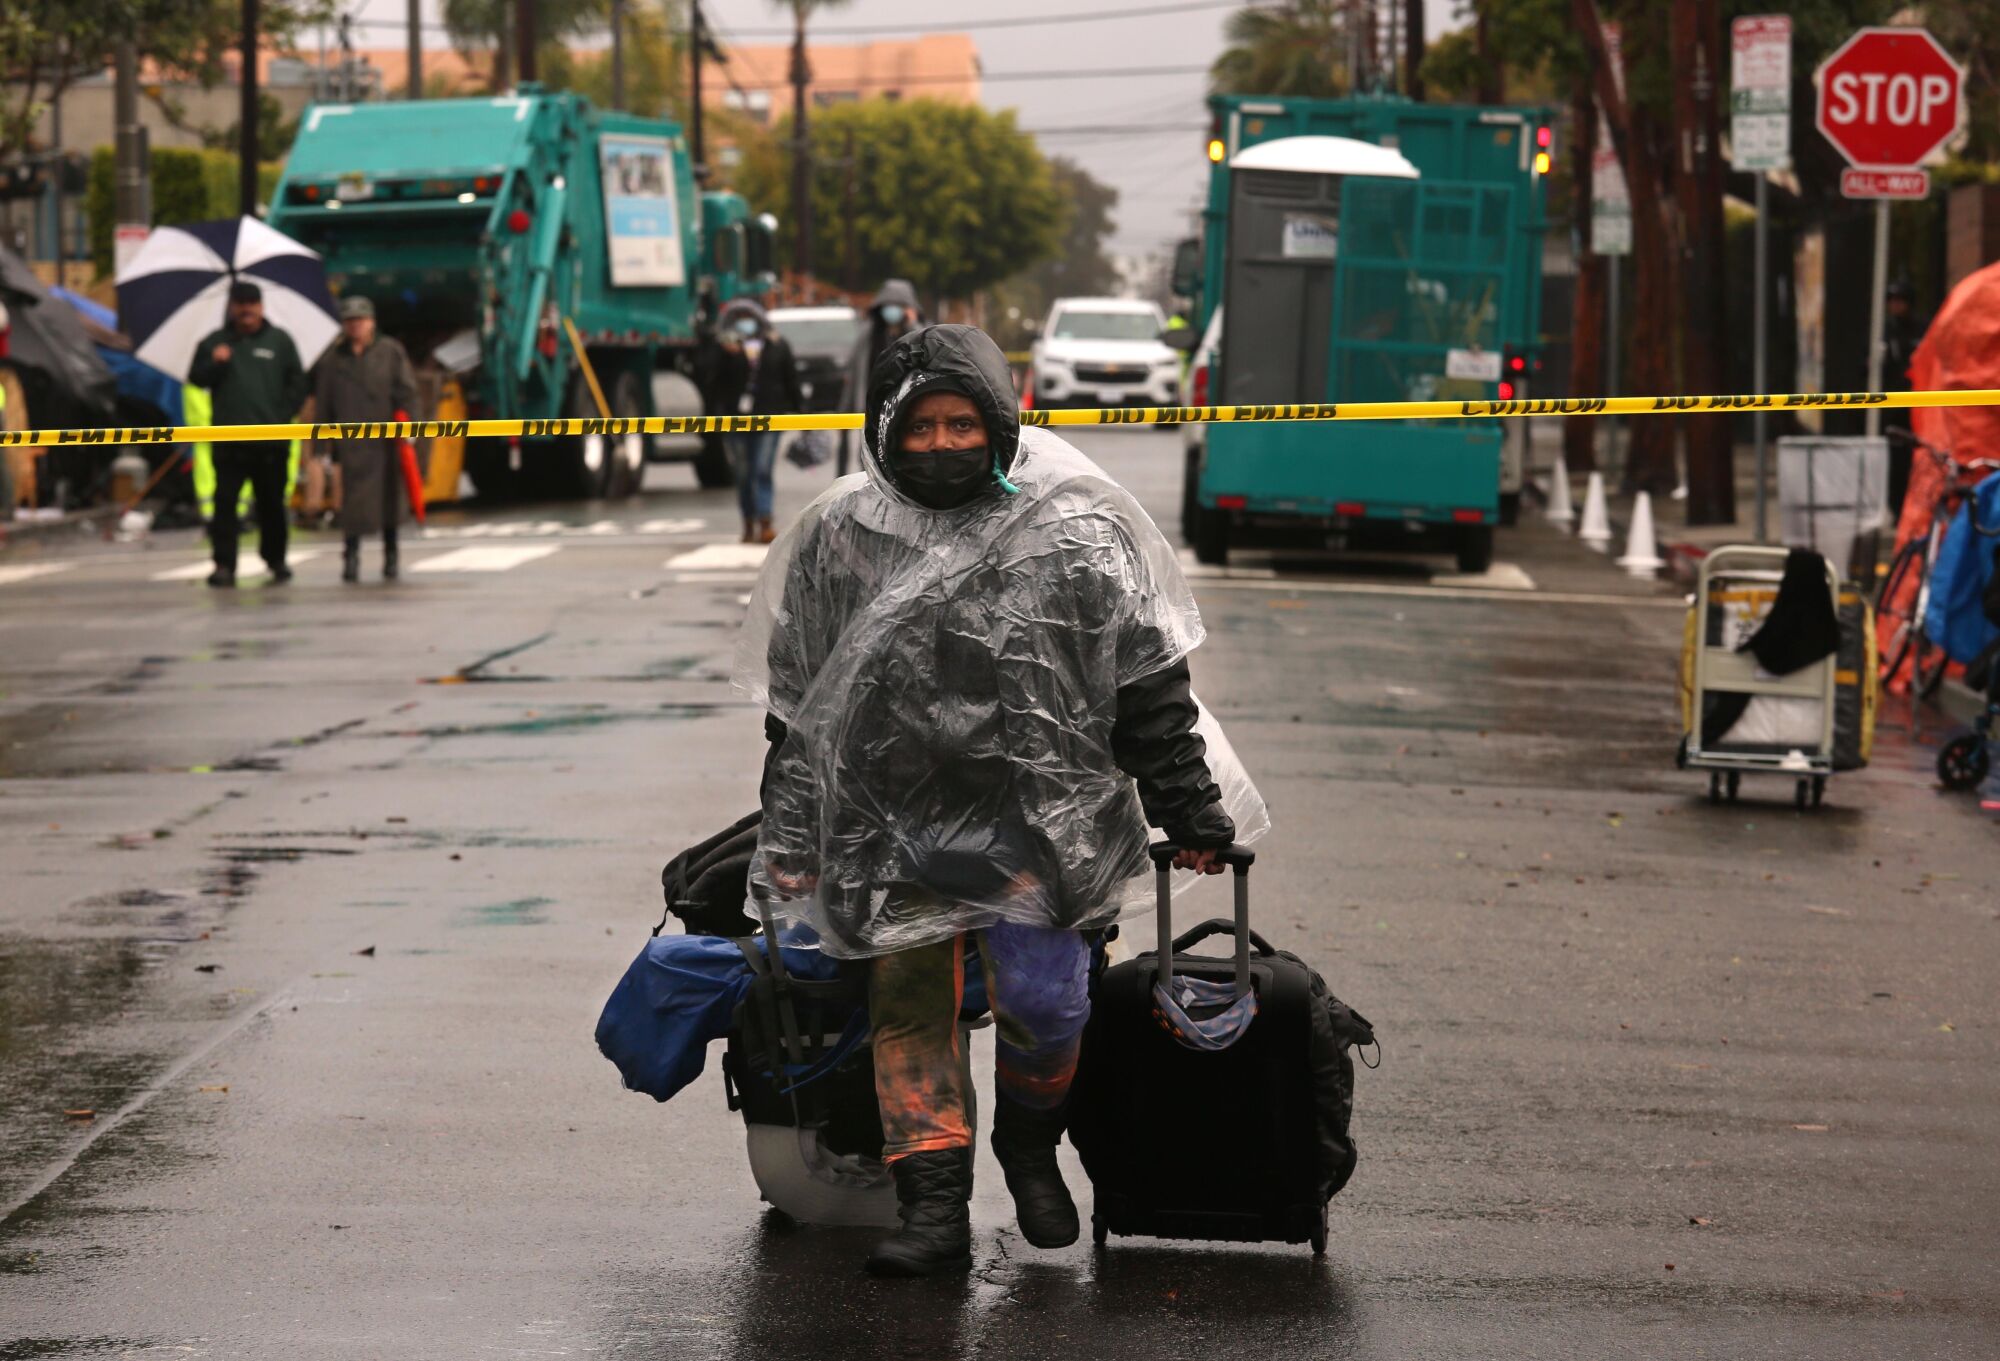 A person in a plastic rain jacket wheels her rolling suitcases. Behind her are green trash trucks and yellow police tape 